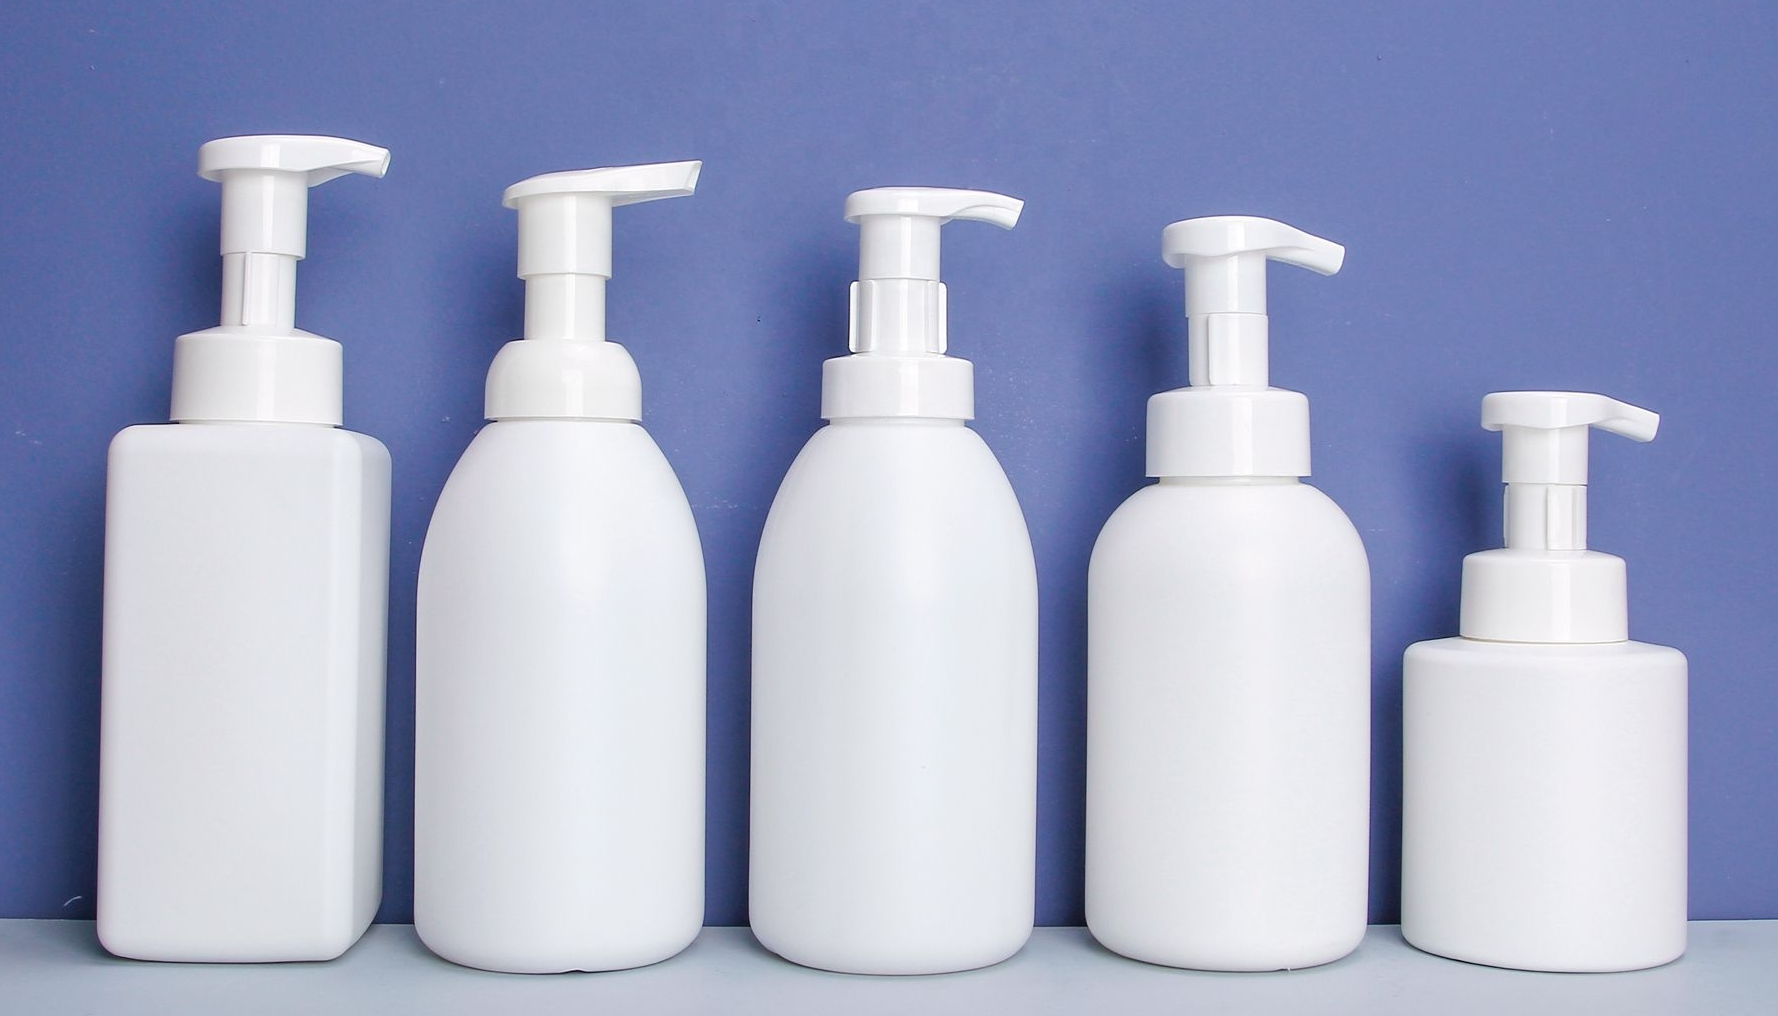 The perfect foam pump for body wash products